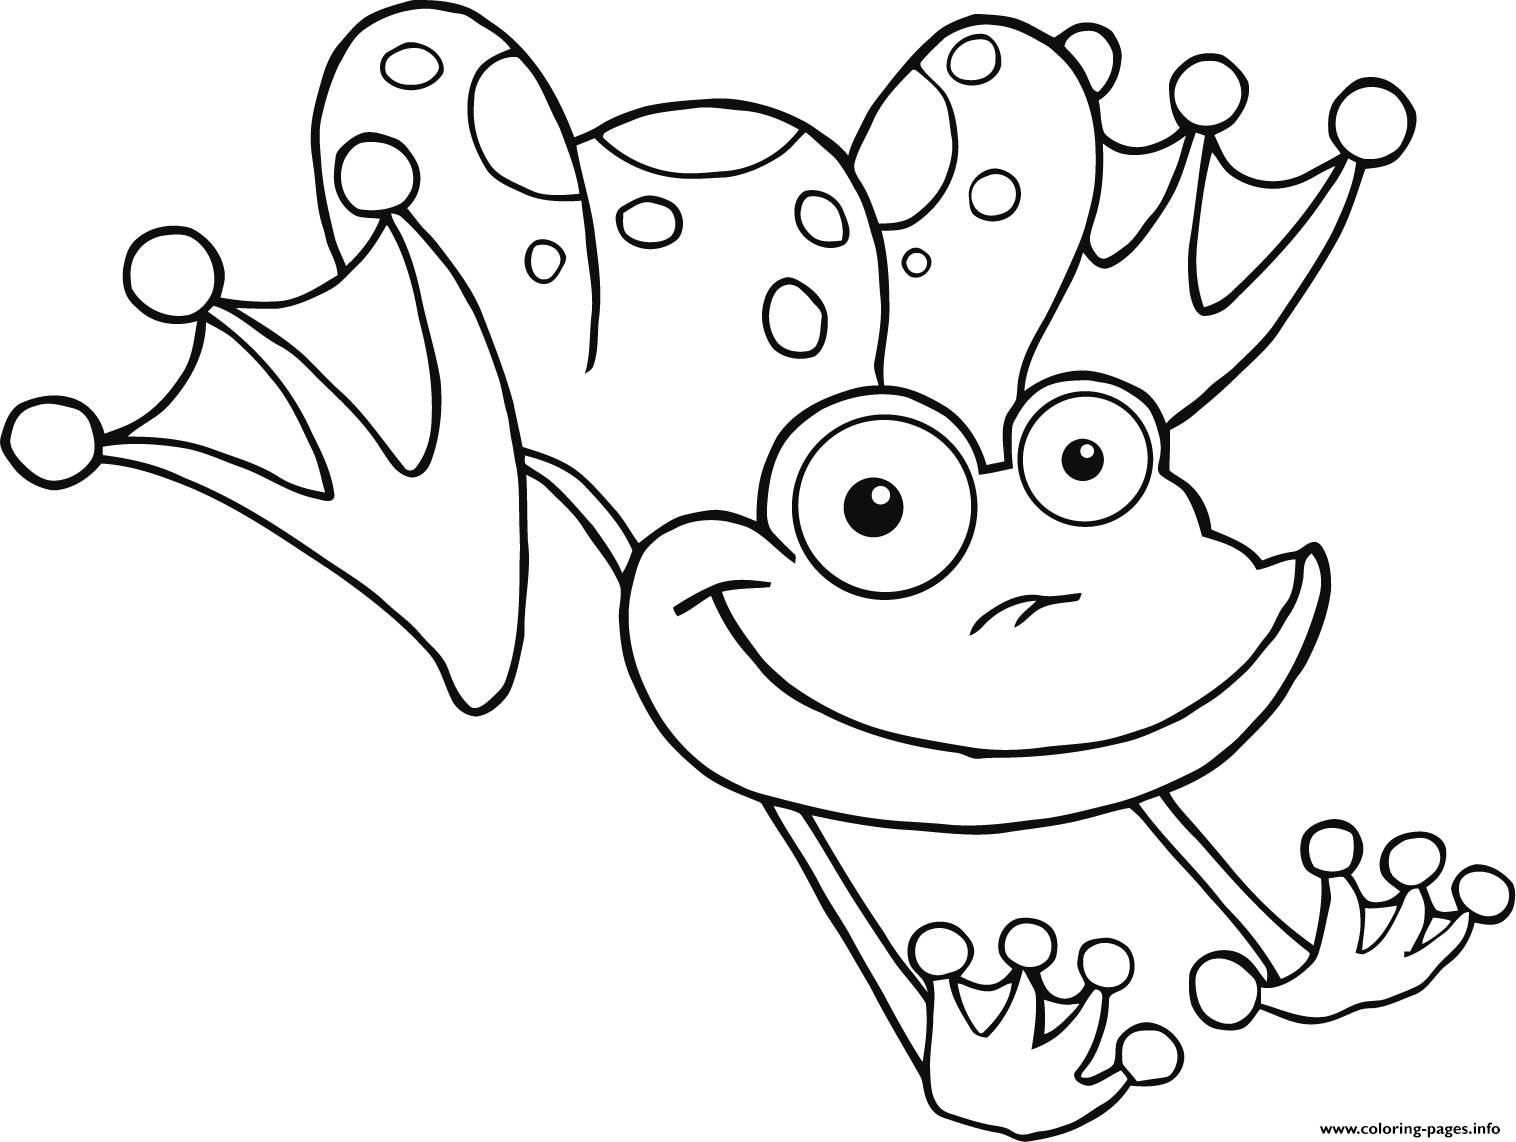 Free Frog S For Kidse924 coloring